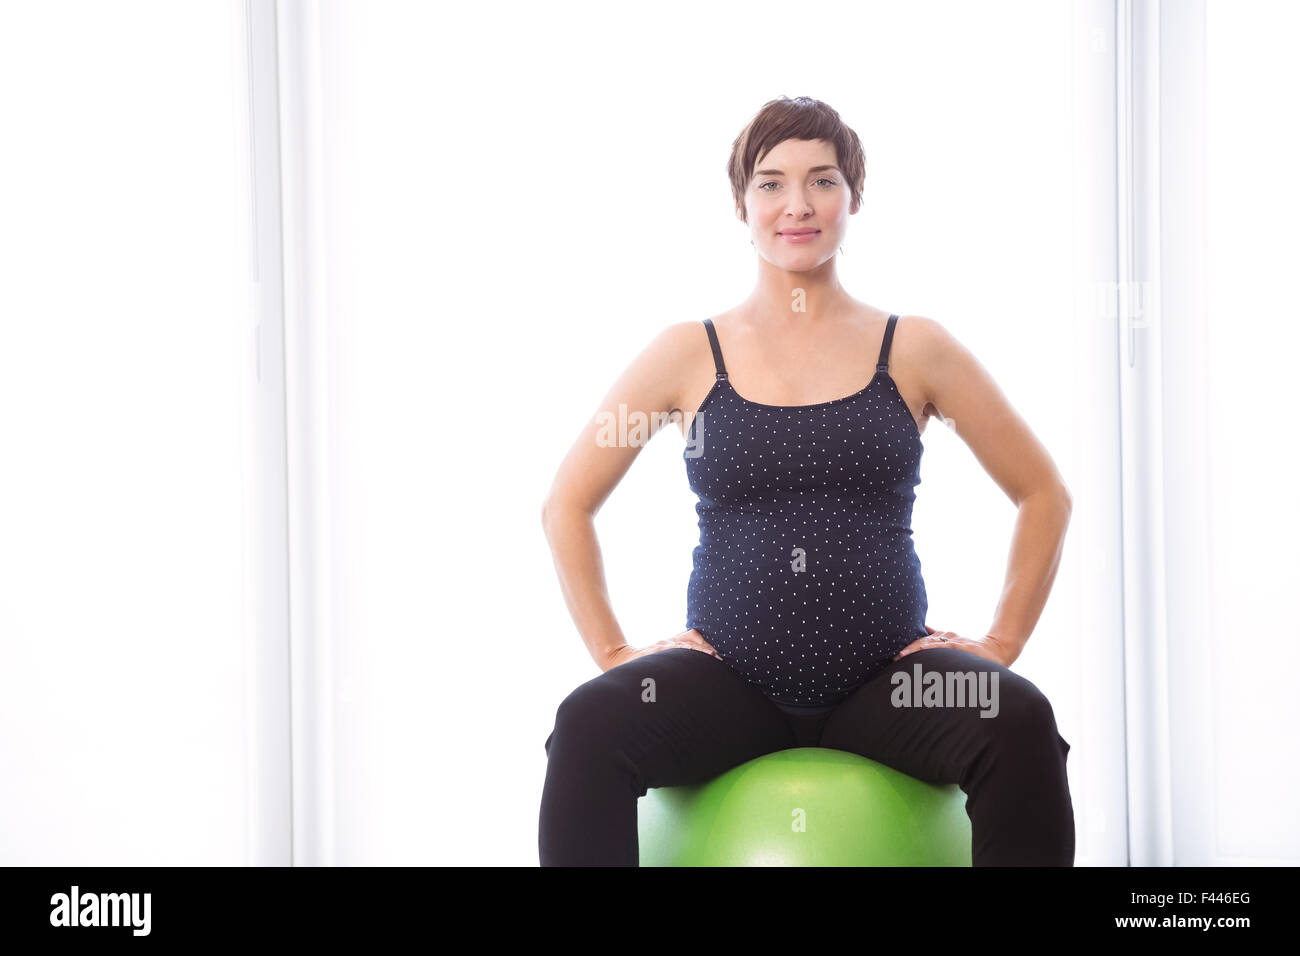 Pregnant woman keeping in shape Stock Photo